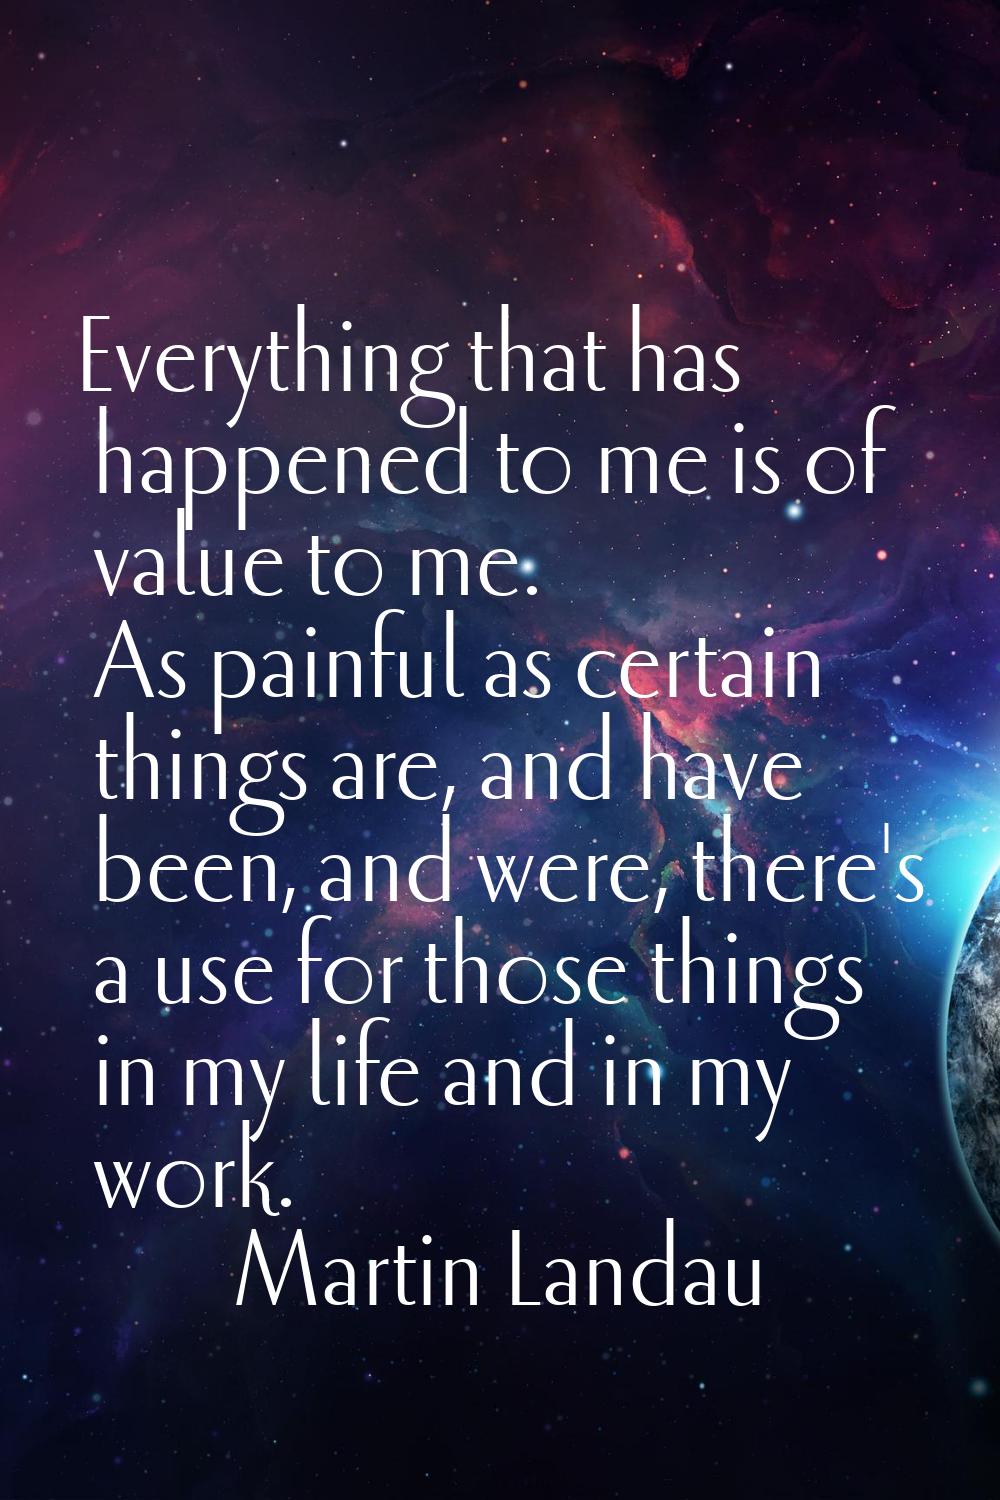 Everything that has happened to me is of value to me. As painful as certain things are, and have be